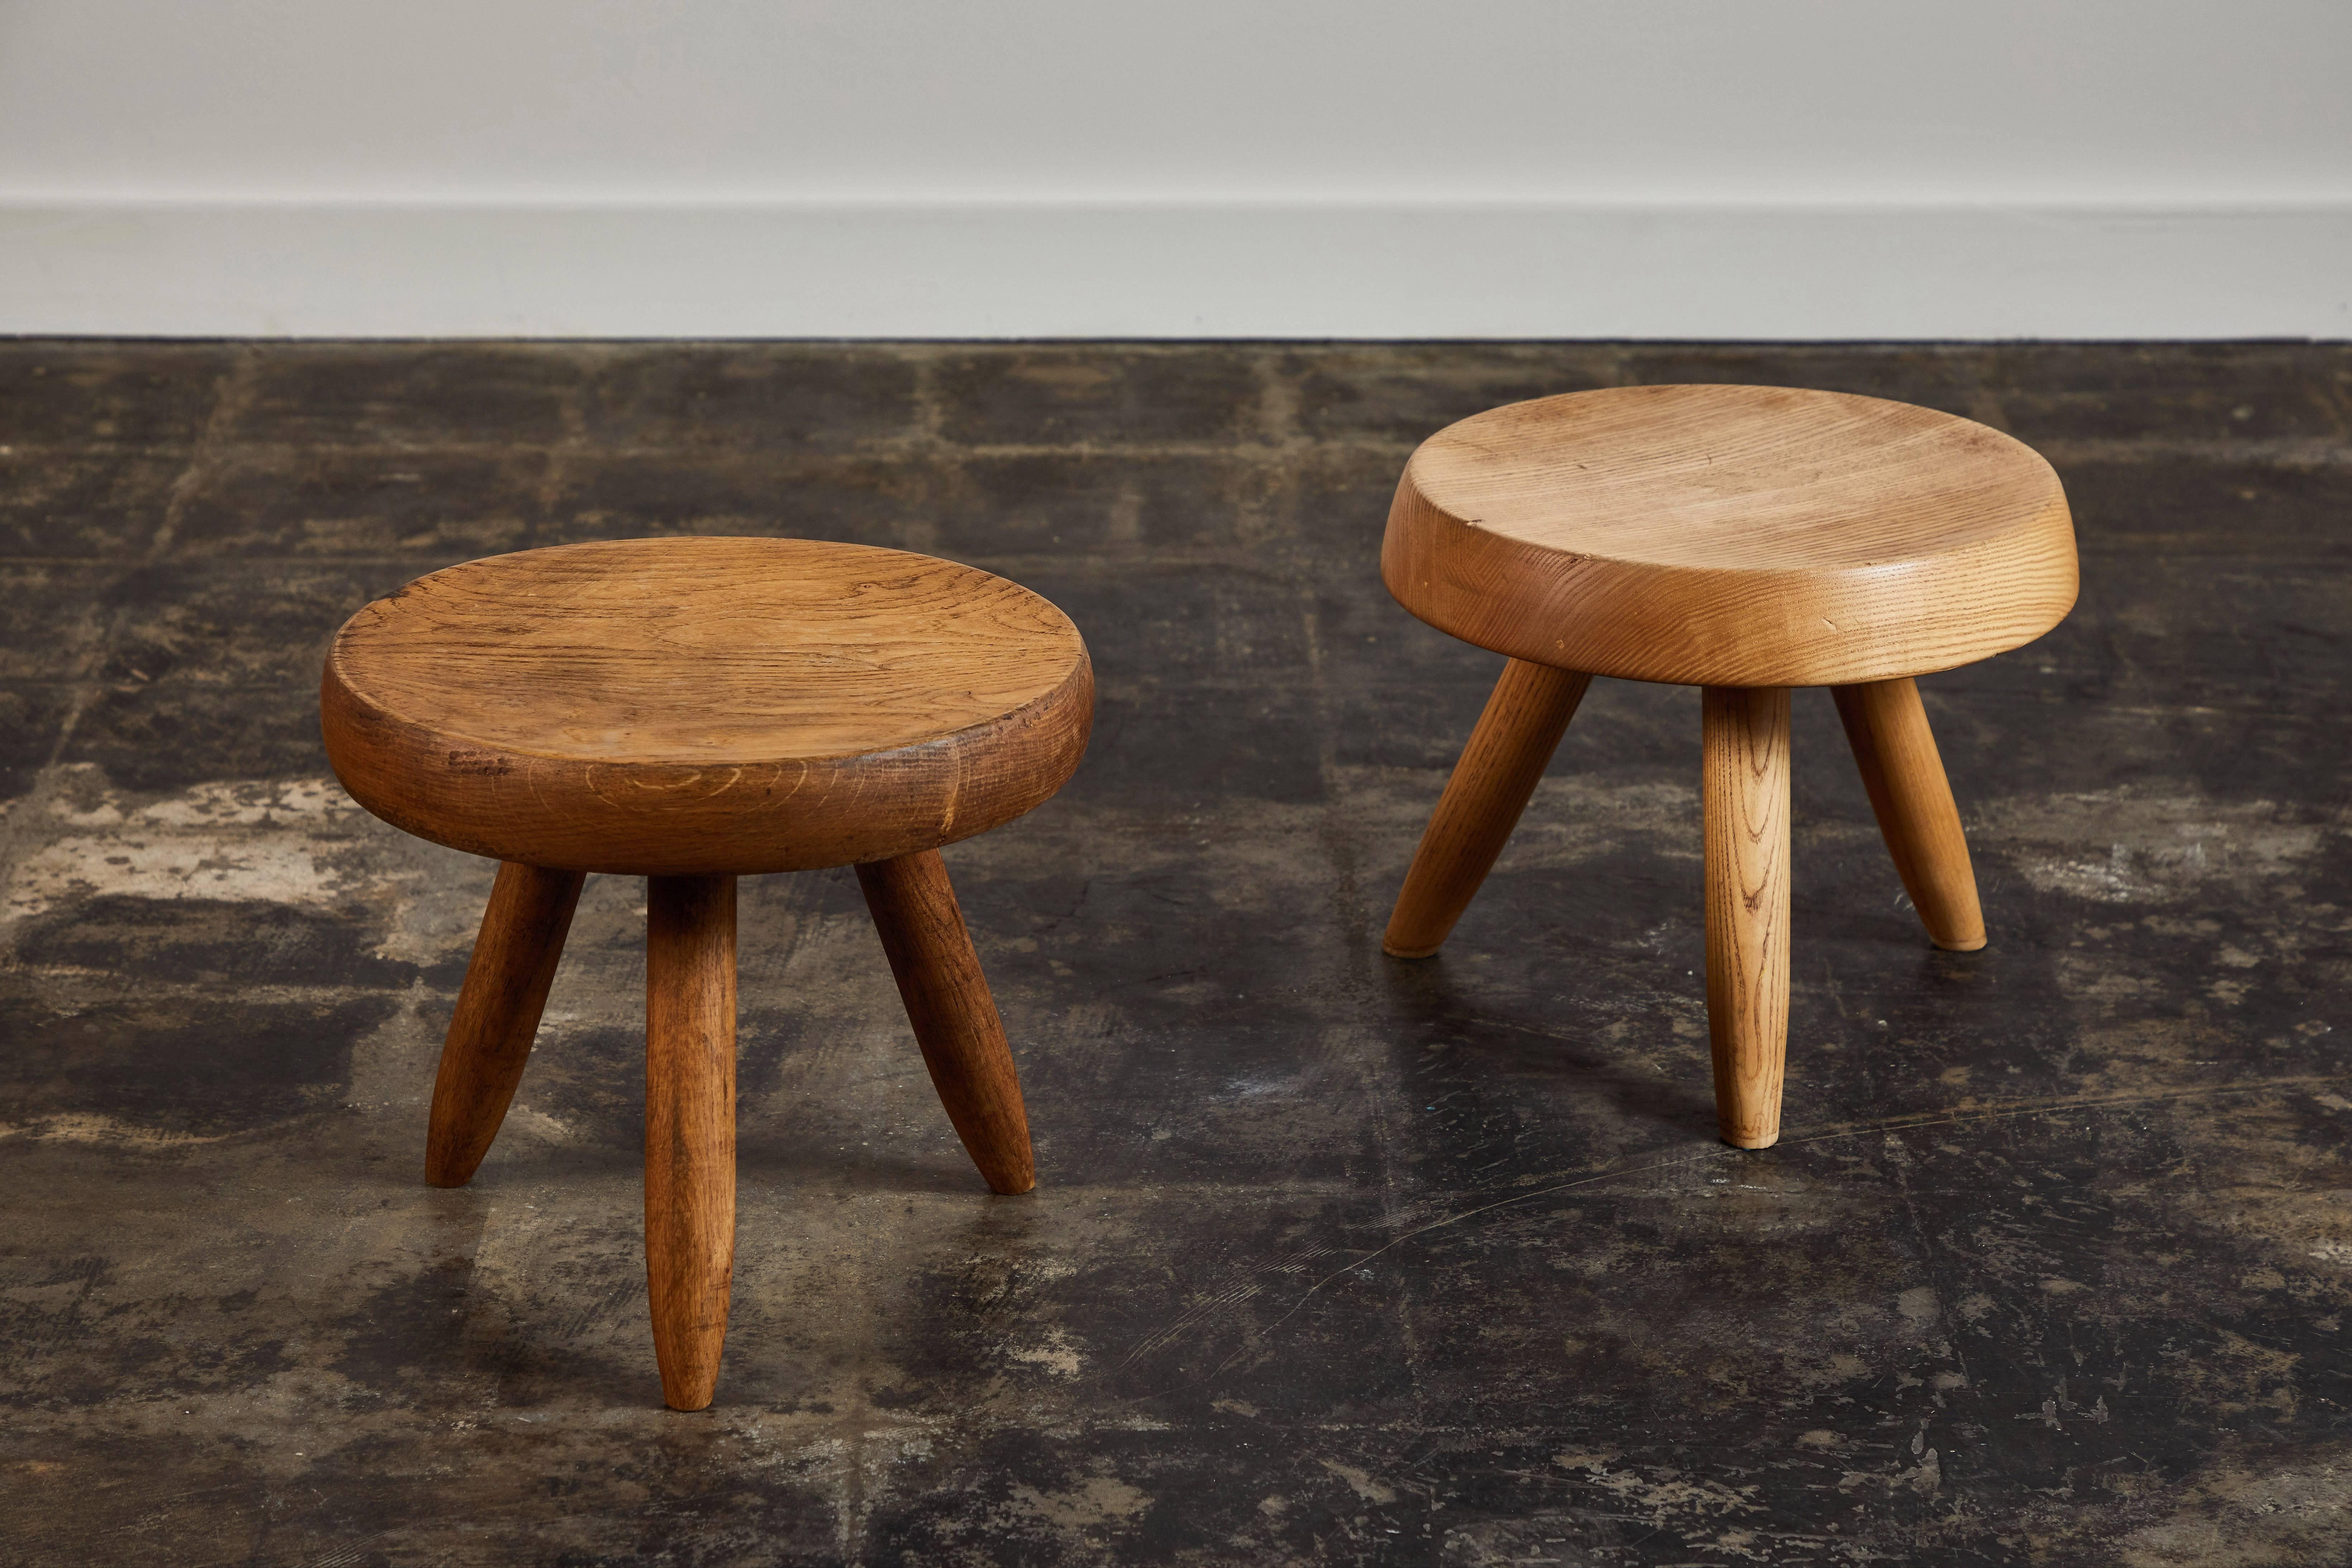 Wood stool by Charlotte Perriand for Galerie Steph Simon. Made in France, circa 1947. 

Stool on left is available.

literature: Charlotte Perriand Complete Works Volume 2: 1940-1955, Barsac, pg. 458 Les Décorateurs Des Années 50, Favardin, pg. 137